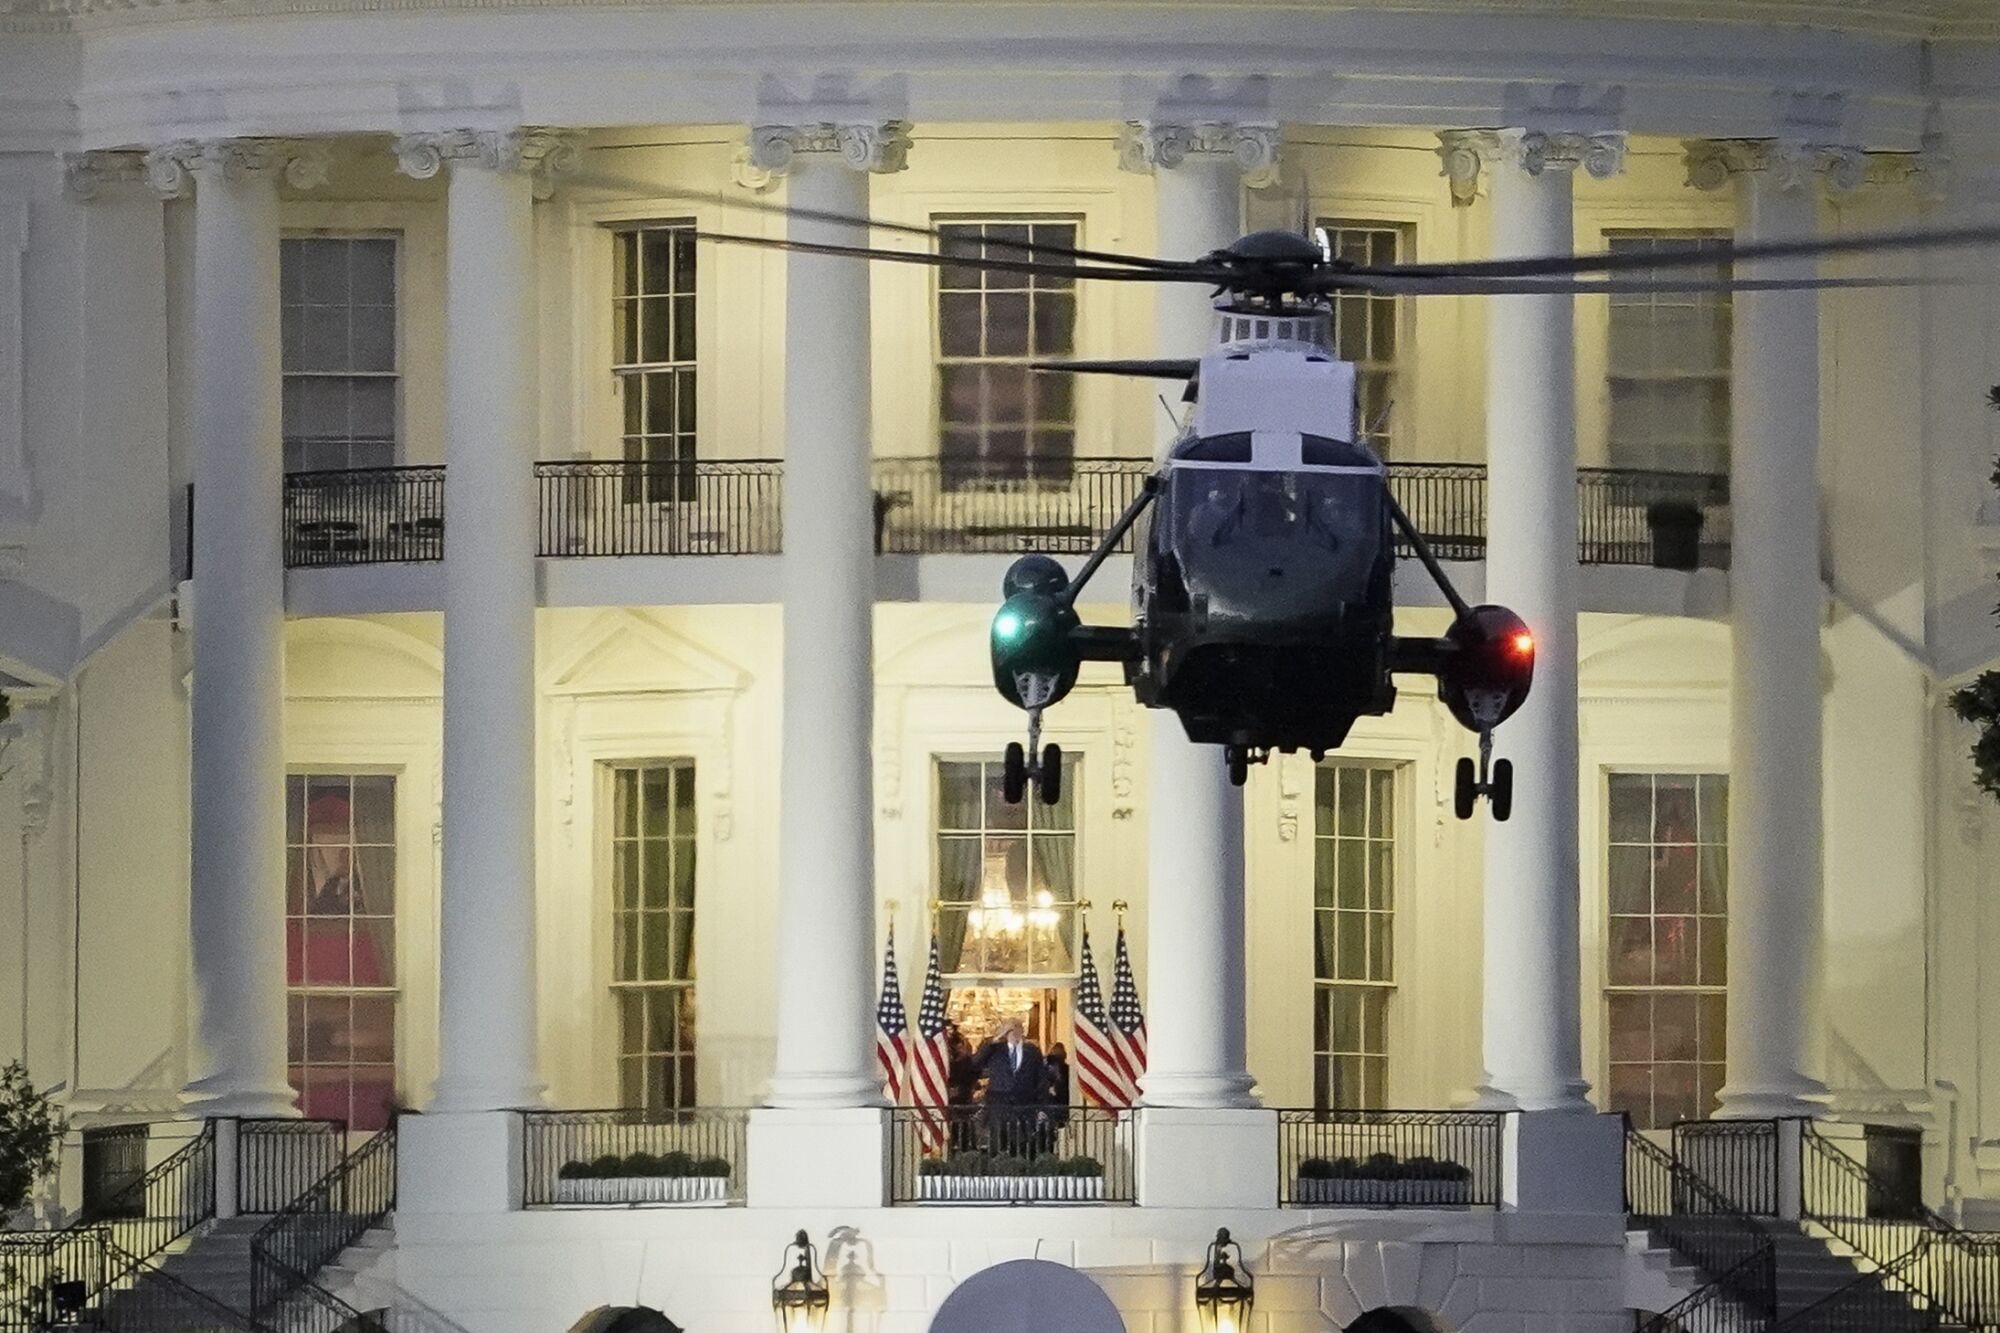 President Trump stands on the Blue Room balcony as Marine One lifts off from the White House.